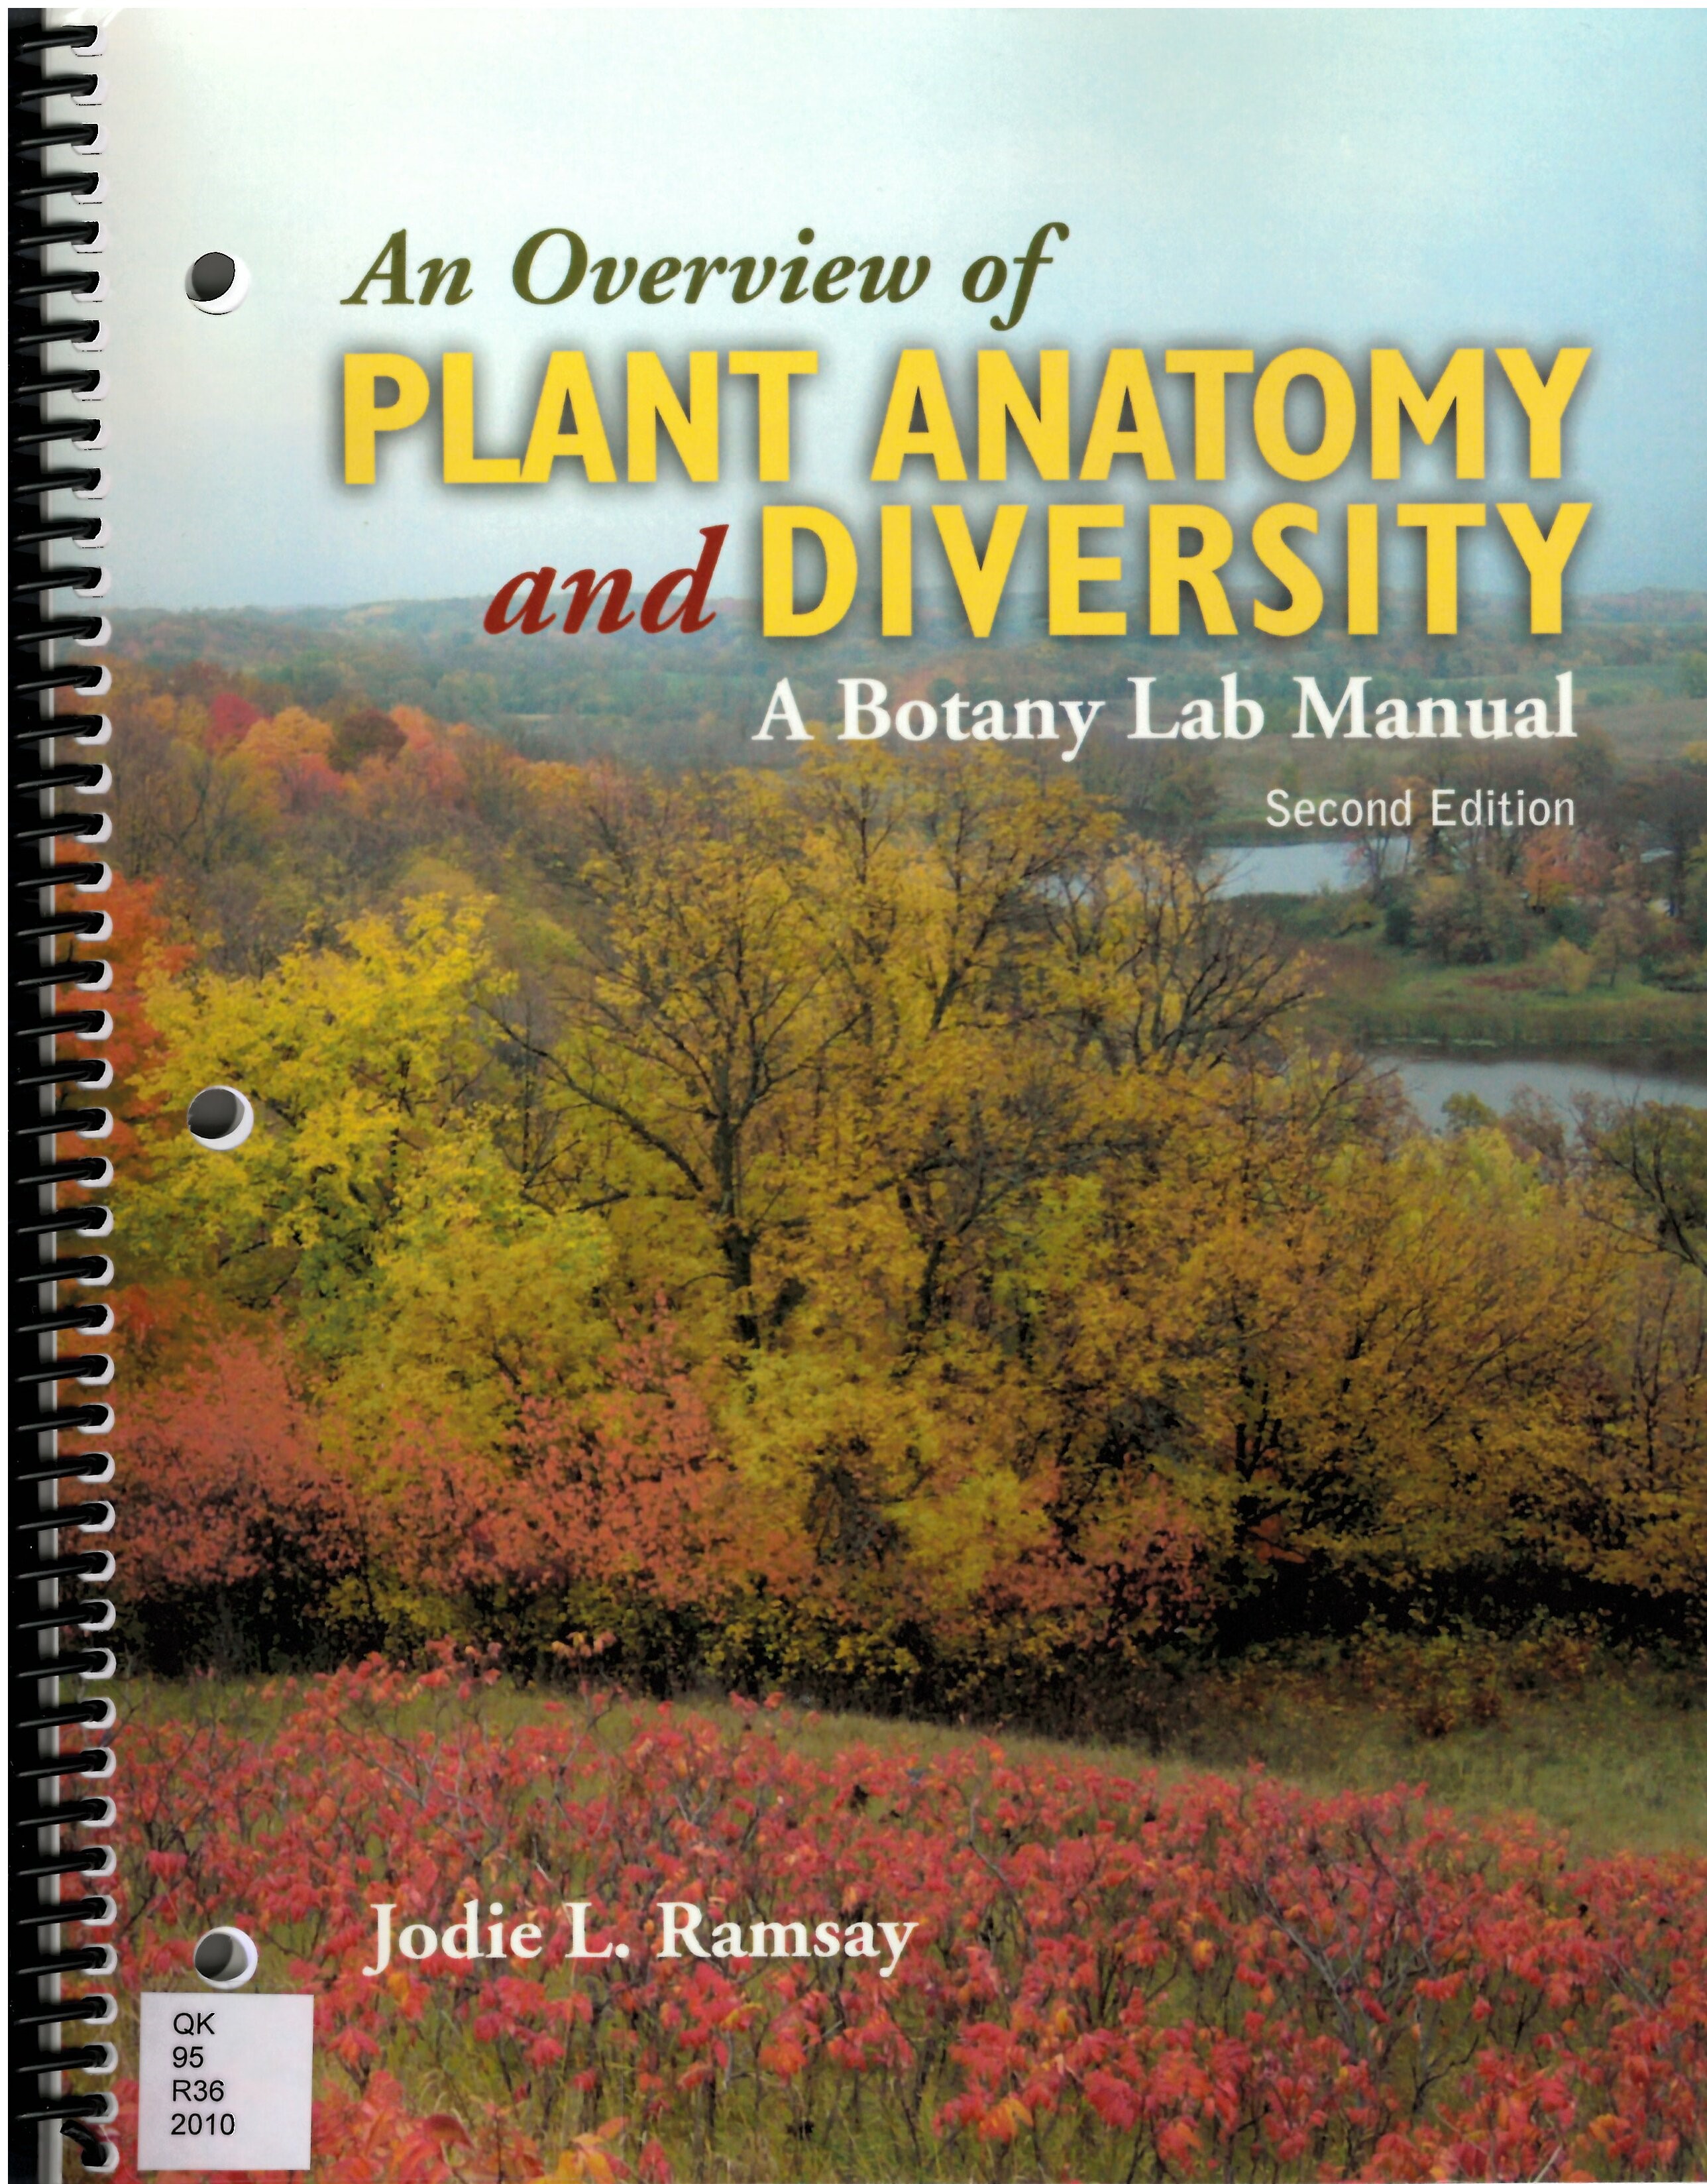 An overview of plant anatomy and diversity : a botany lab manual